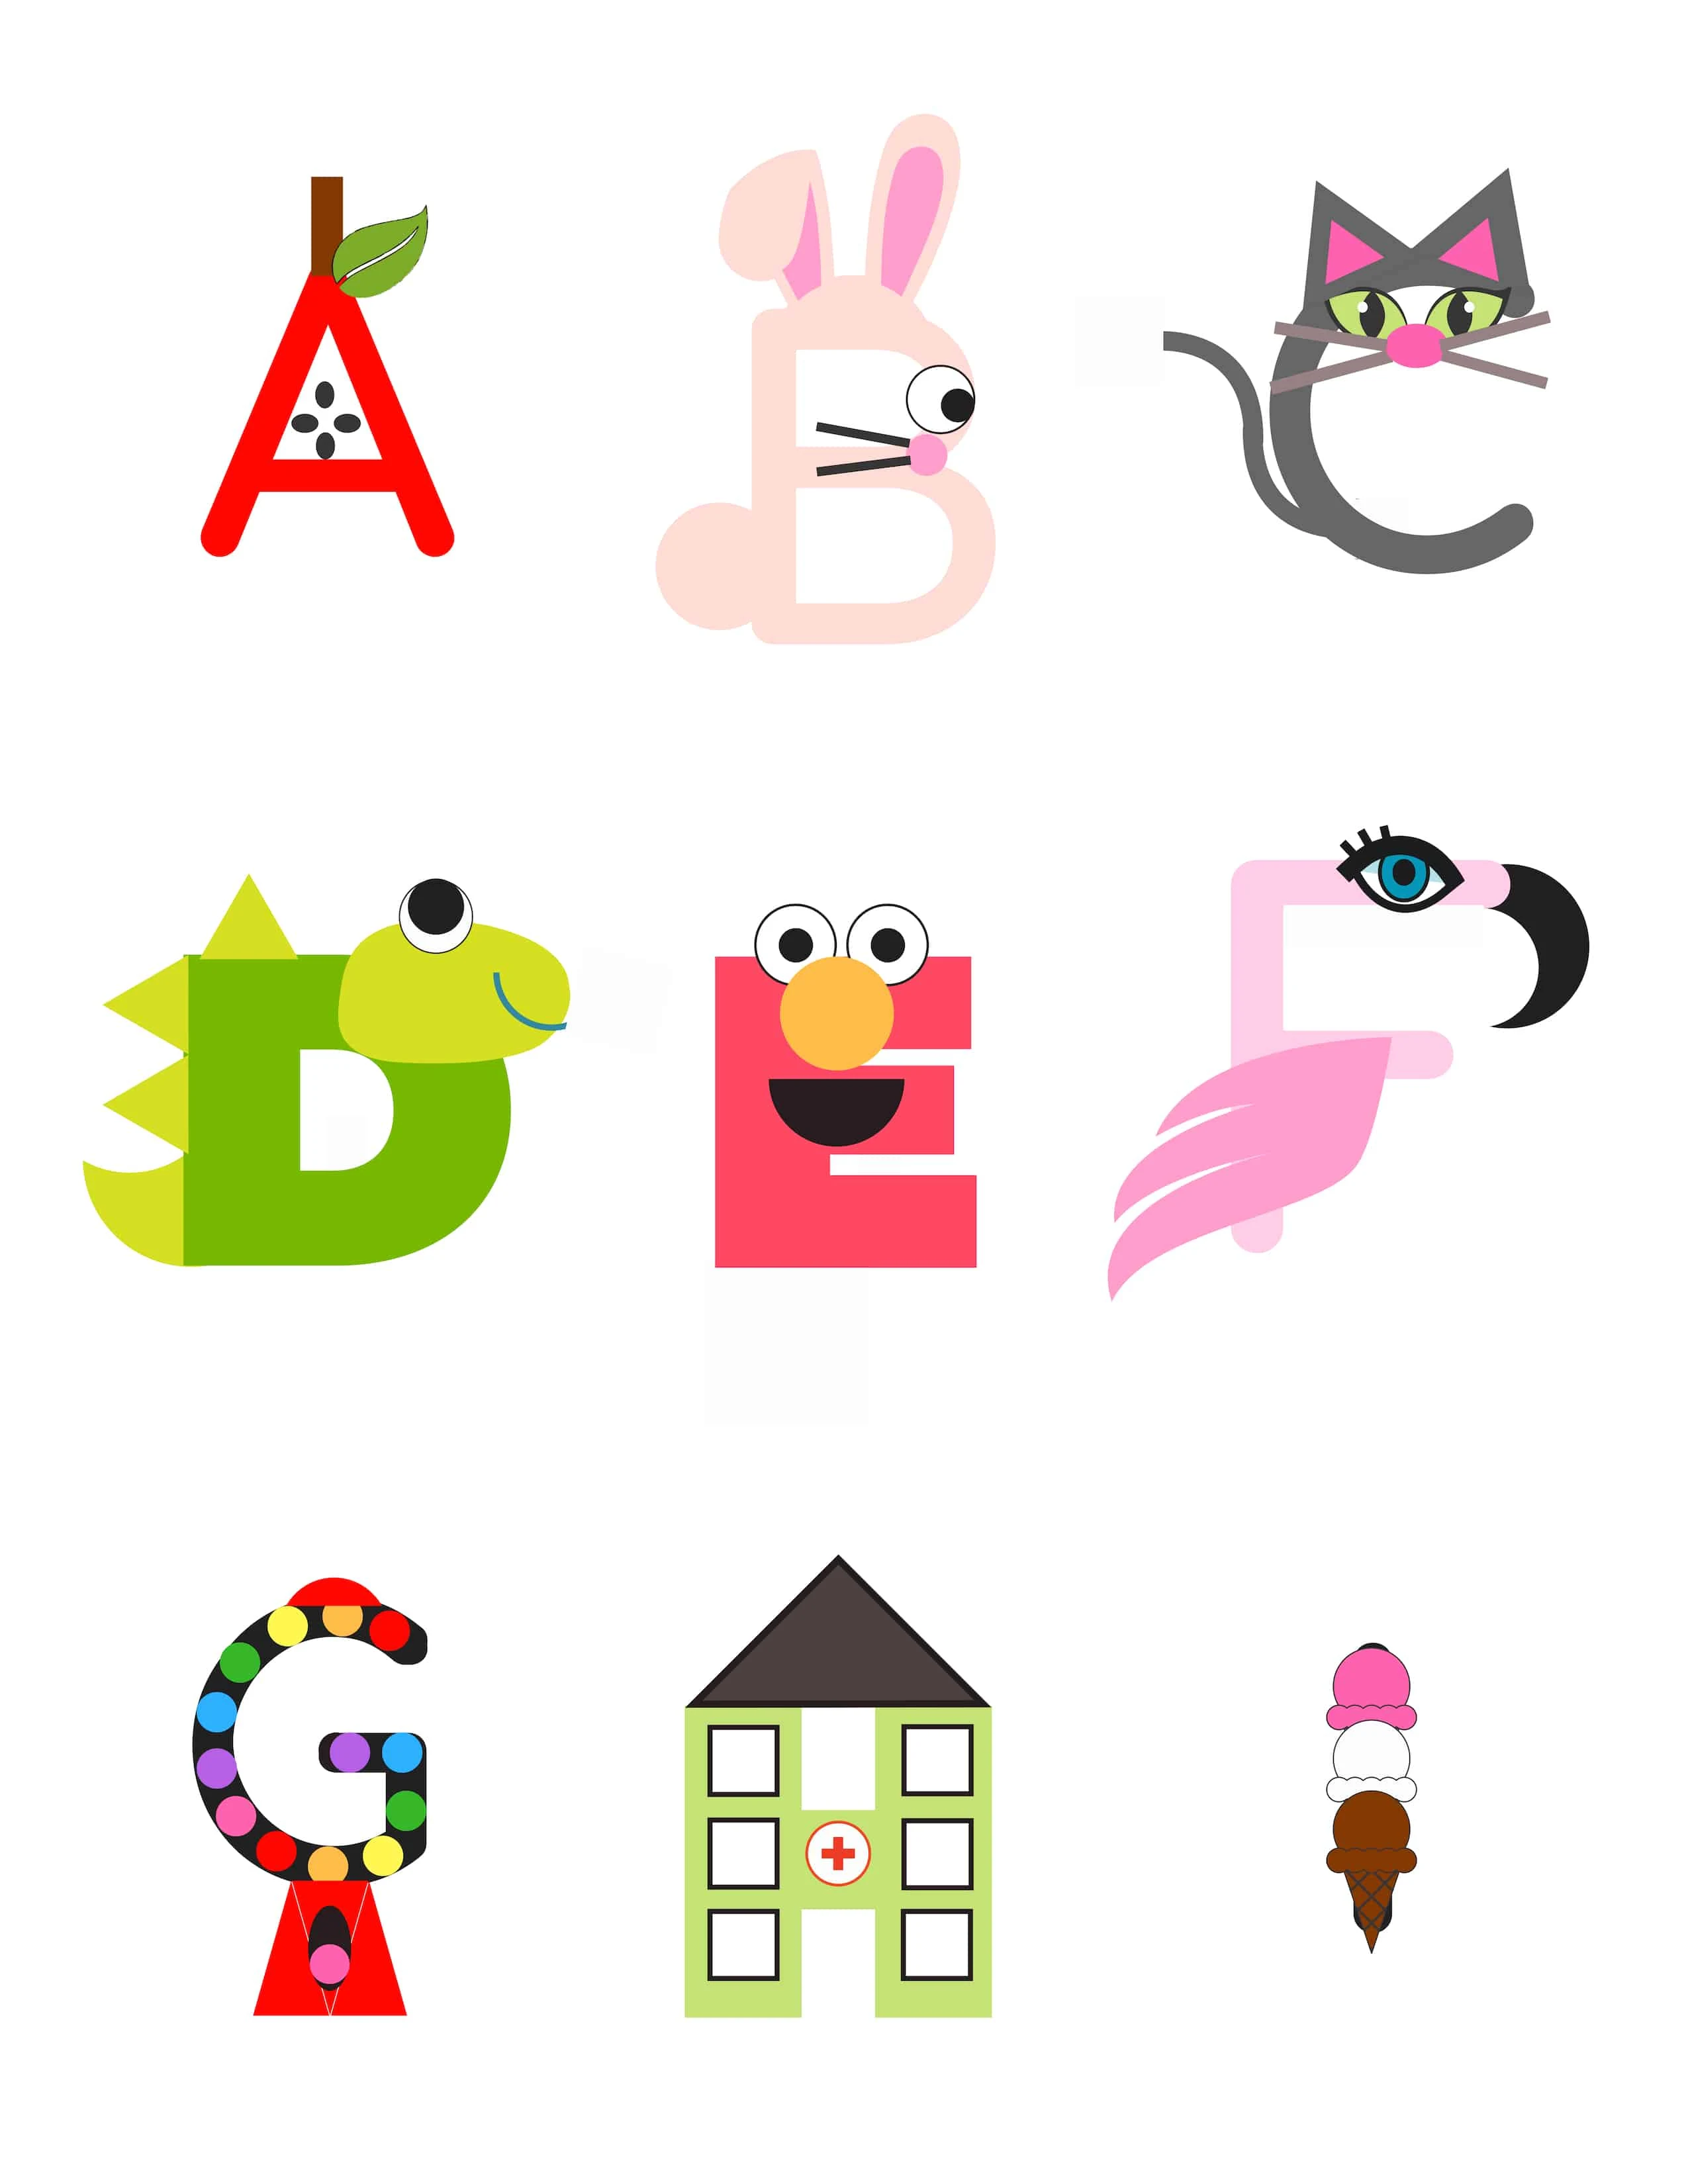 Printable letter crafts for preschoolers and toddlers- simply print, cut, and paste!